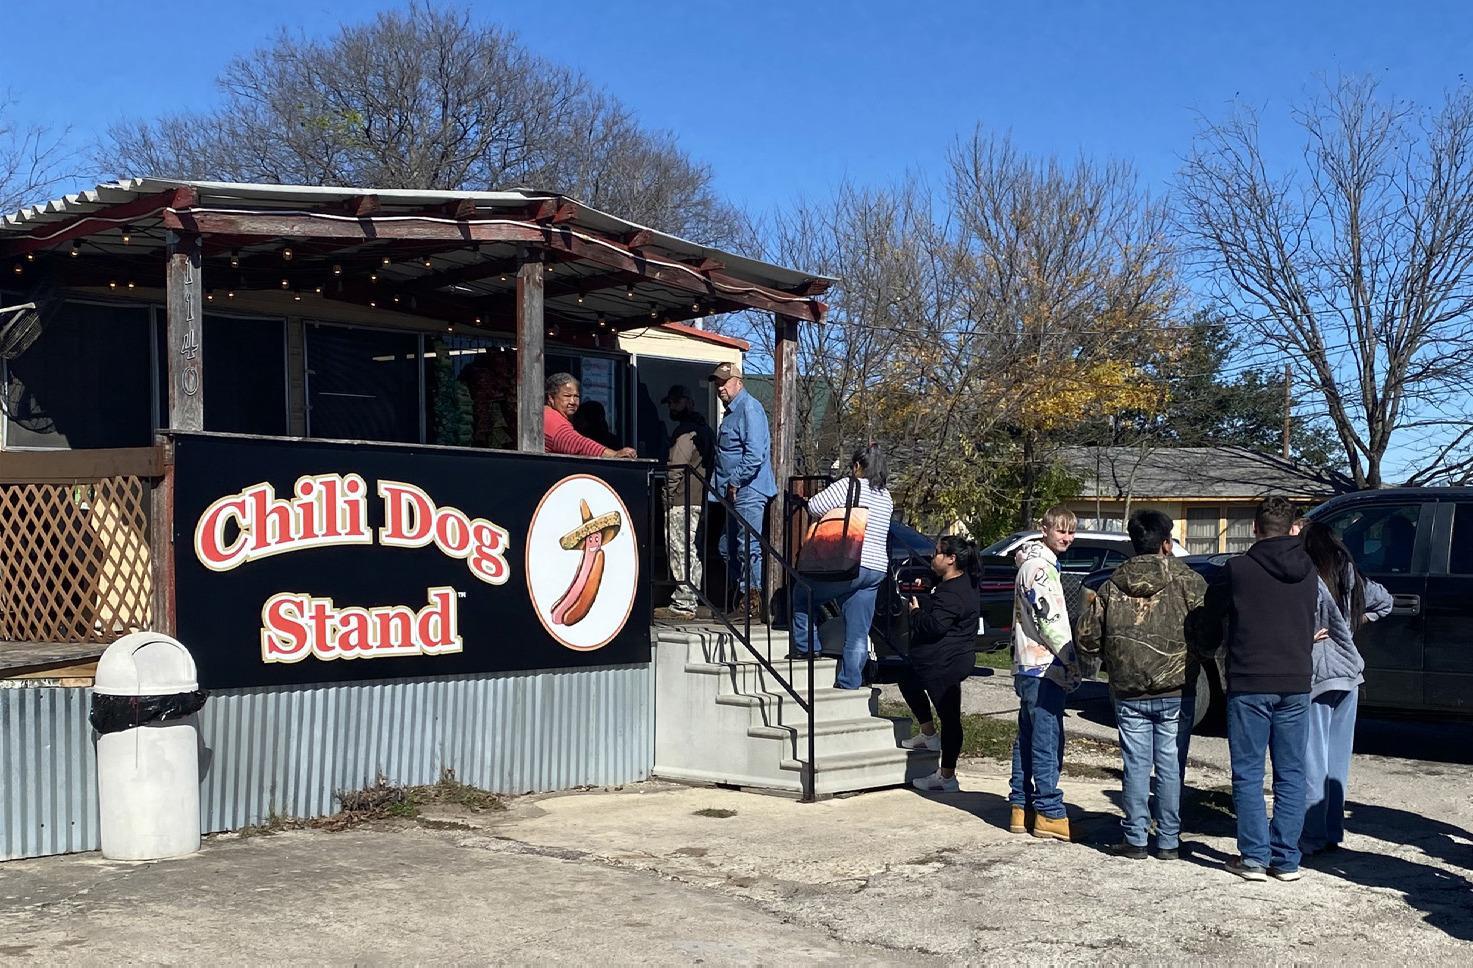 Chili Dog Stand announces closure after 71 years